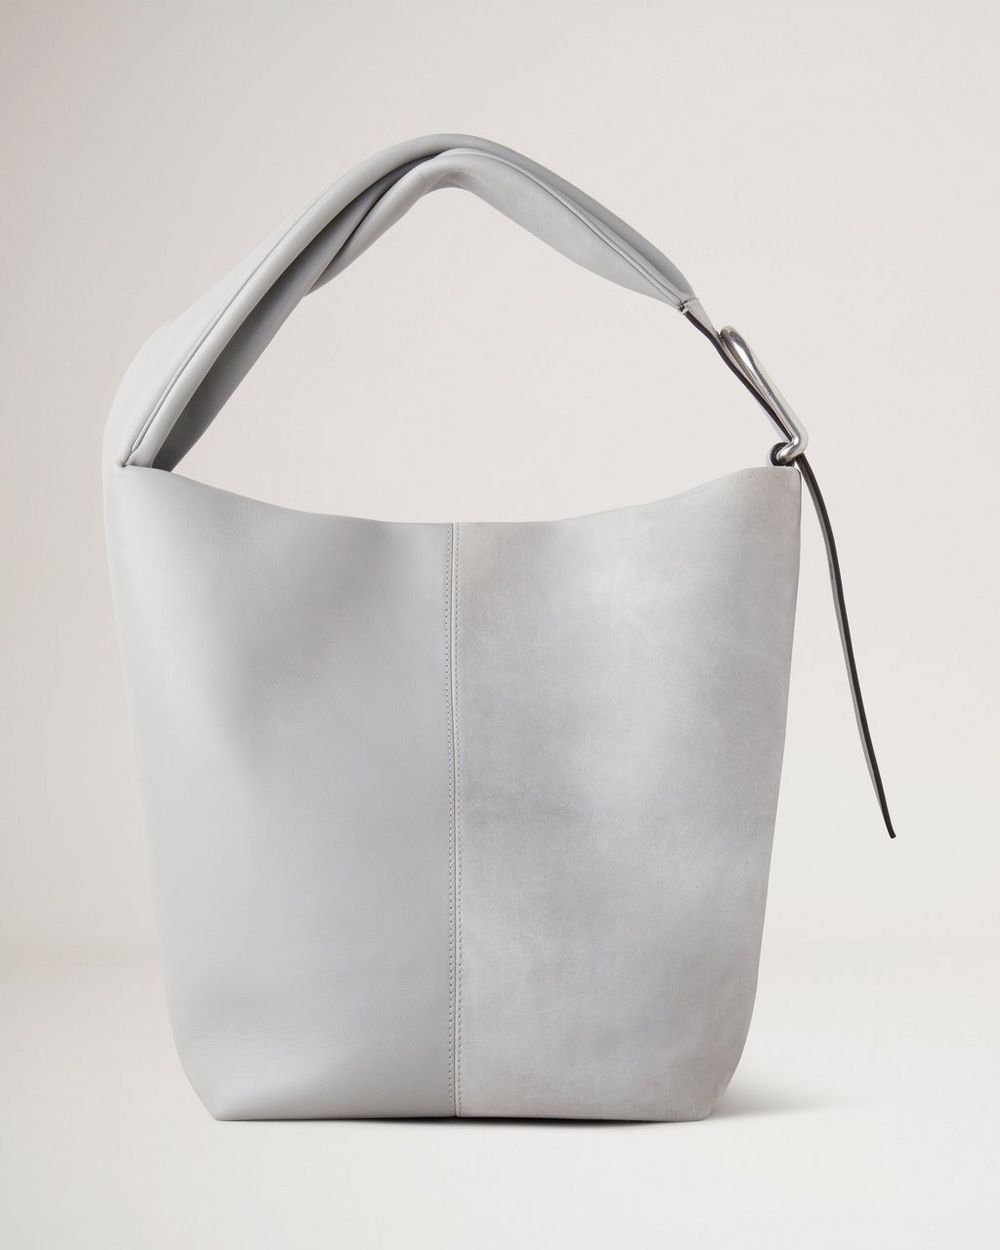 Small Grey Leather Hobo Bag - Slouchy Shoulder Purse